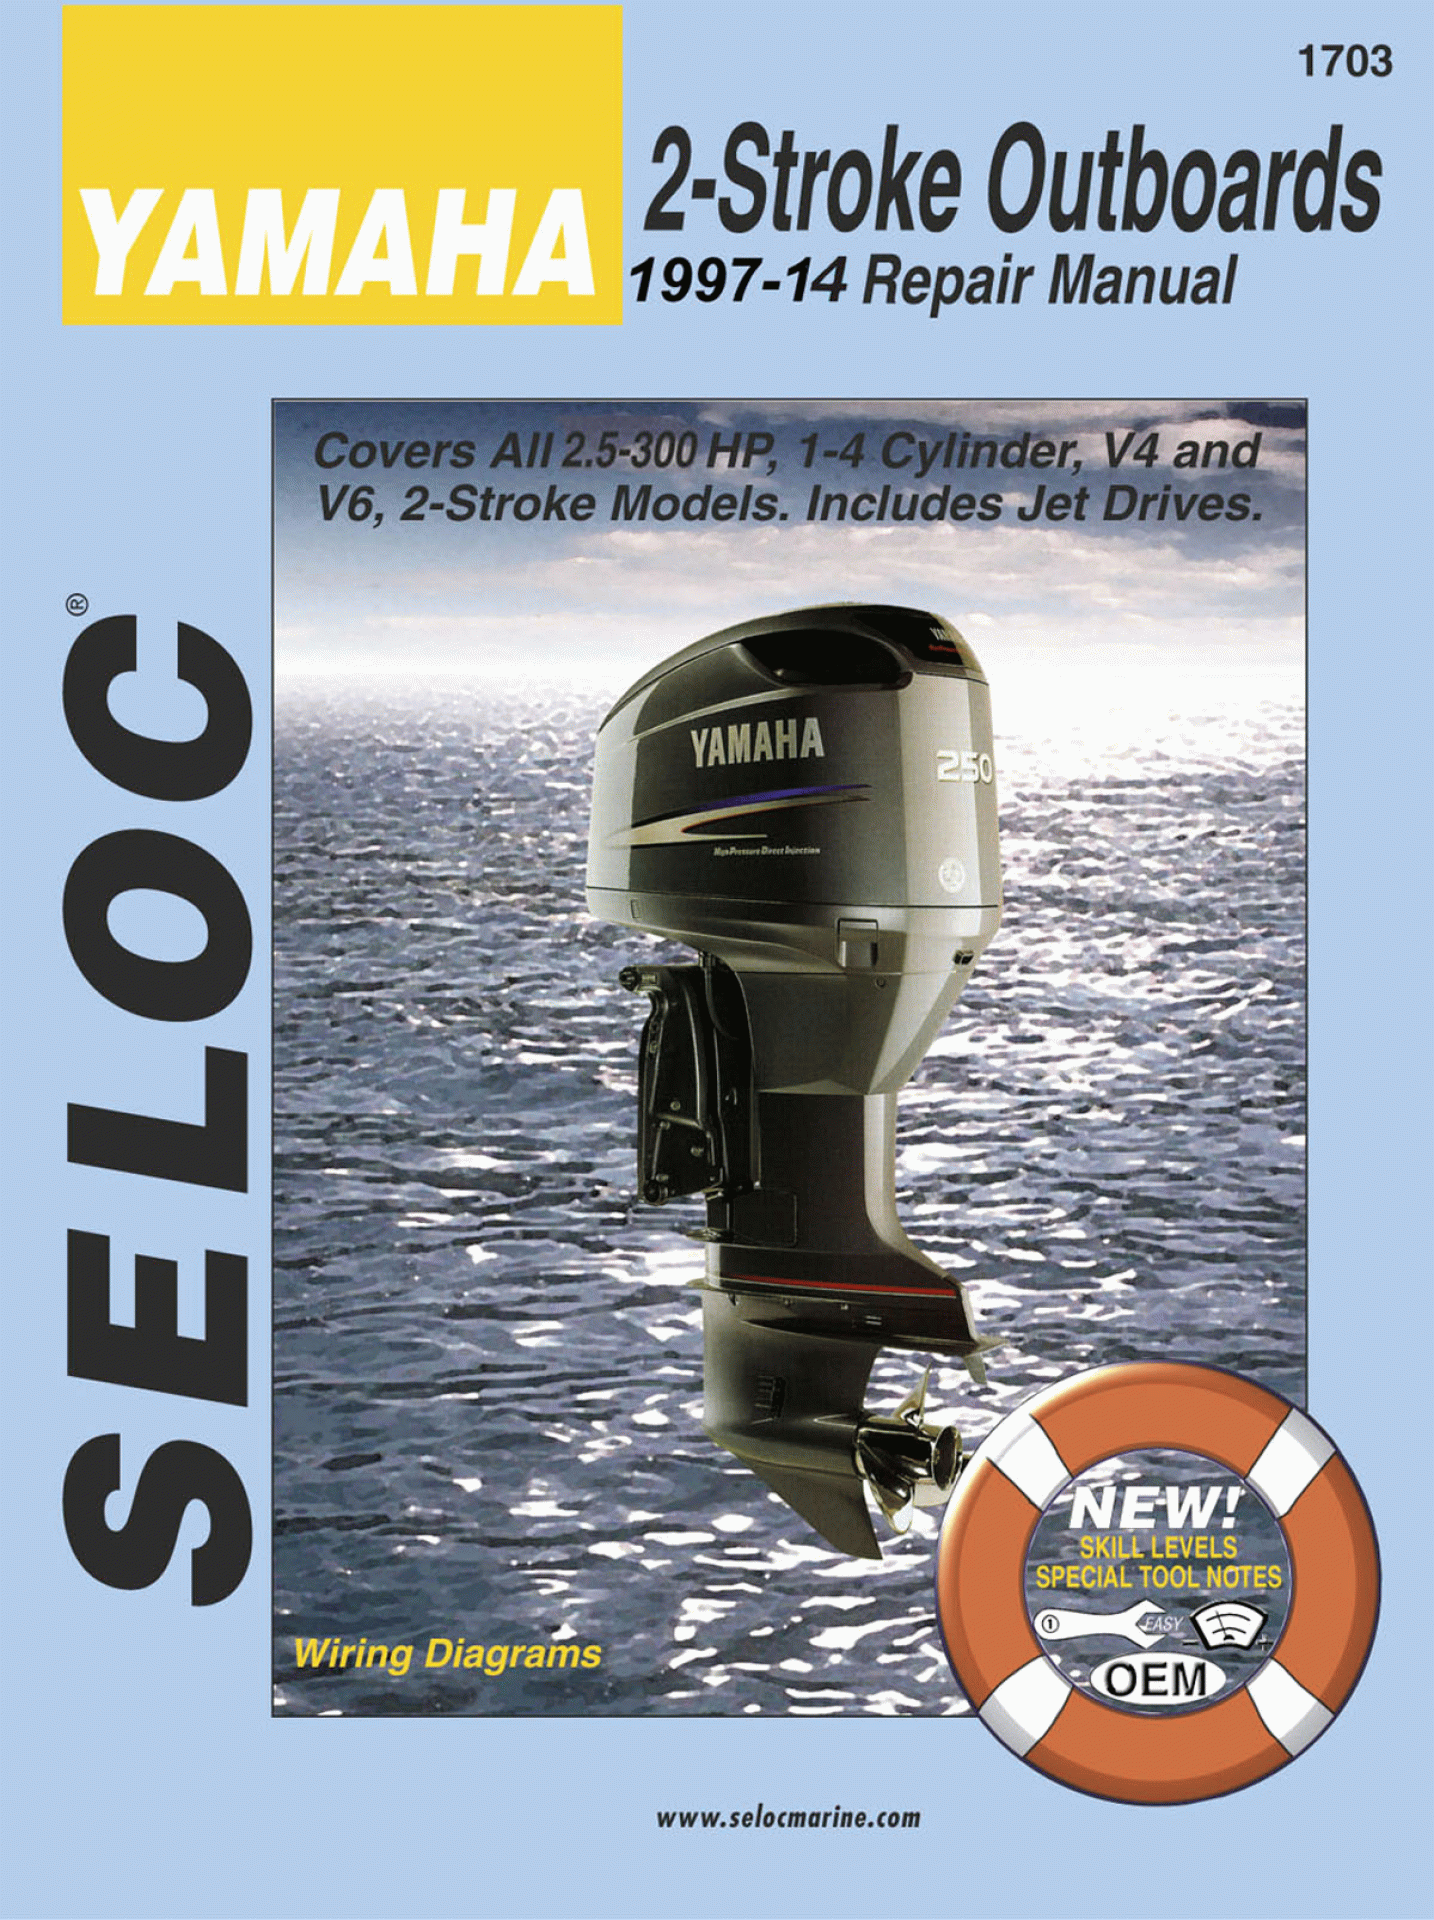 SELOC PUBLISHING | 18-01703 | REPAIR MANUAL Yamaha Outboards All 2-Stroke Engines 1997-14